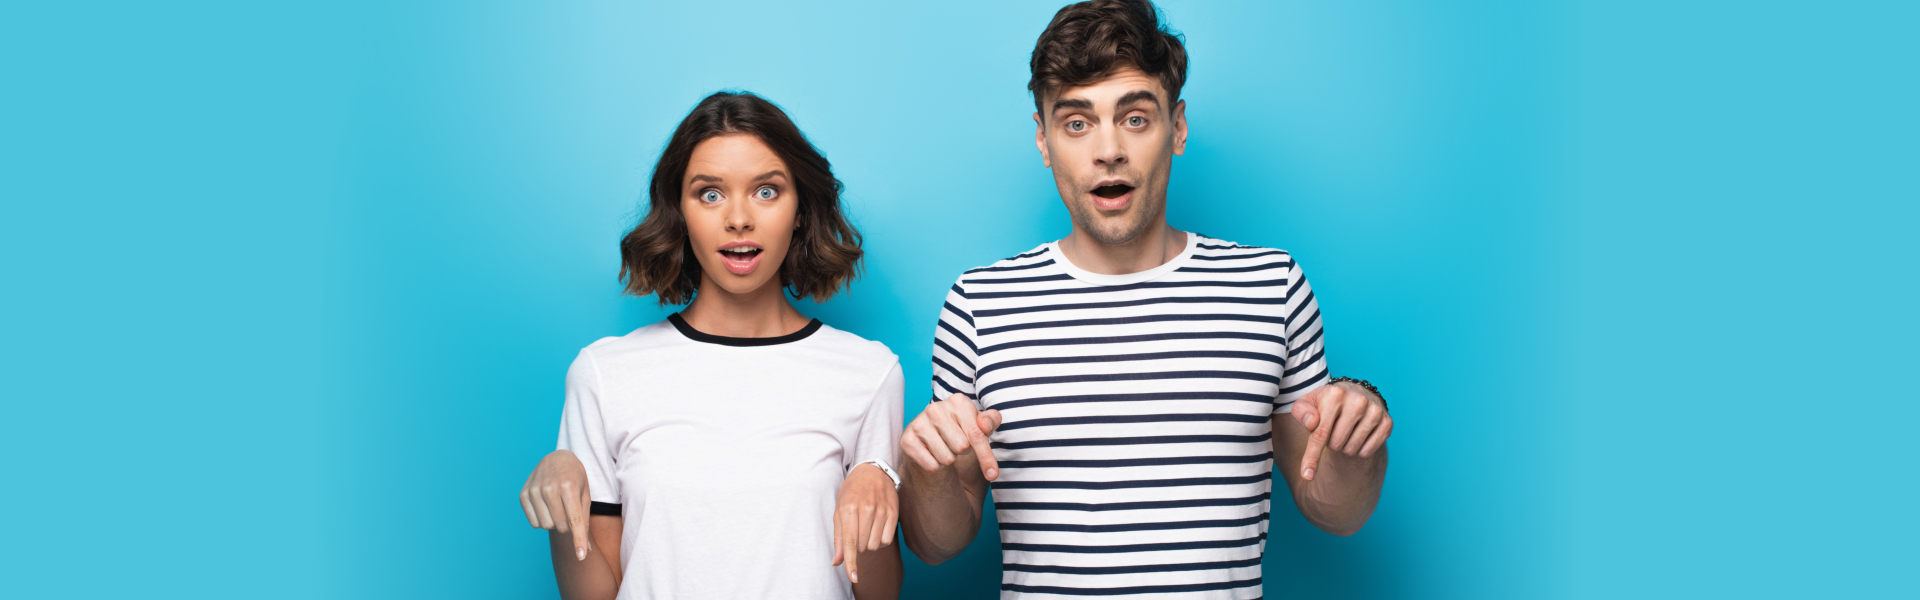 surprised man and woman pointing down with fingers and looking at camera on blue background